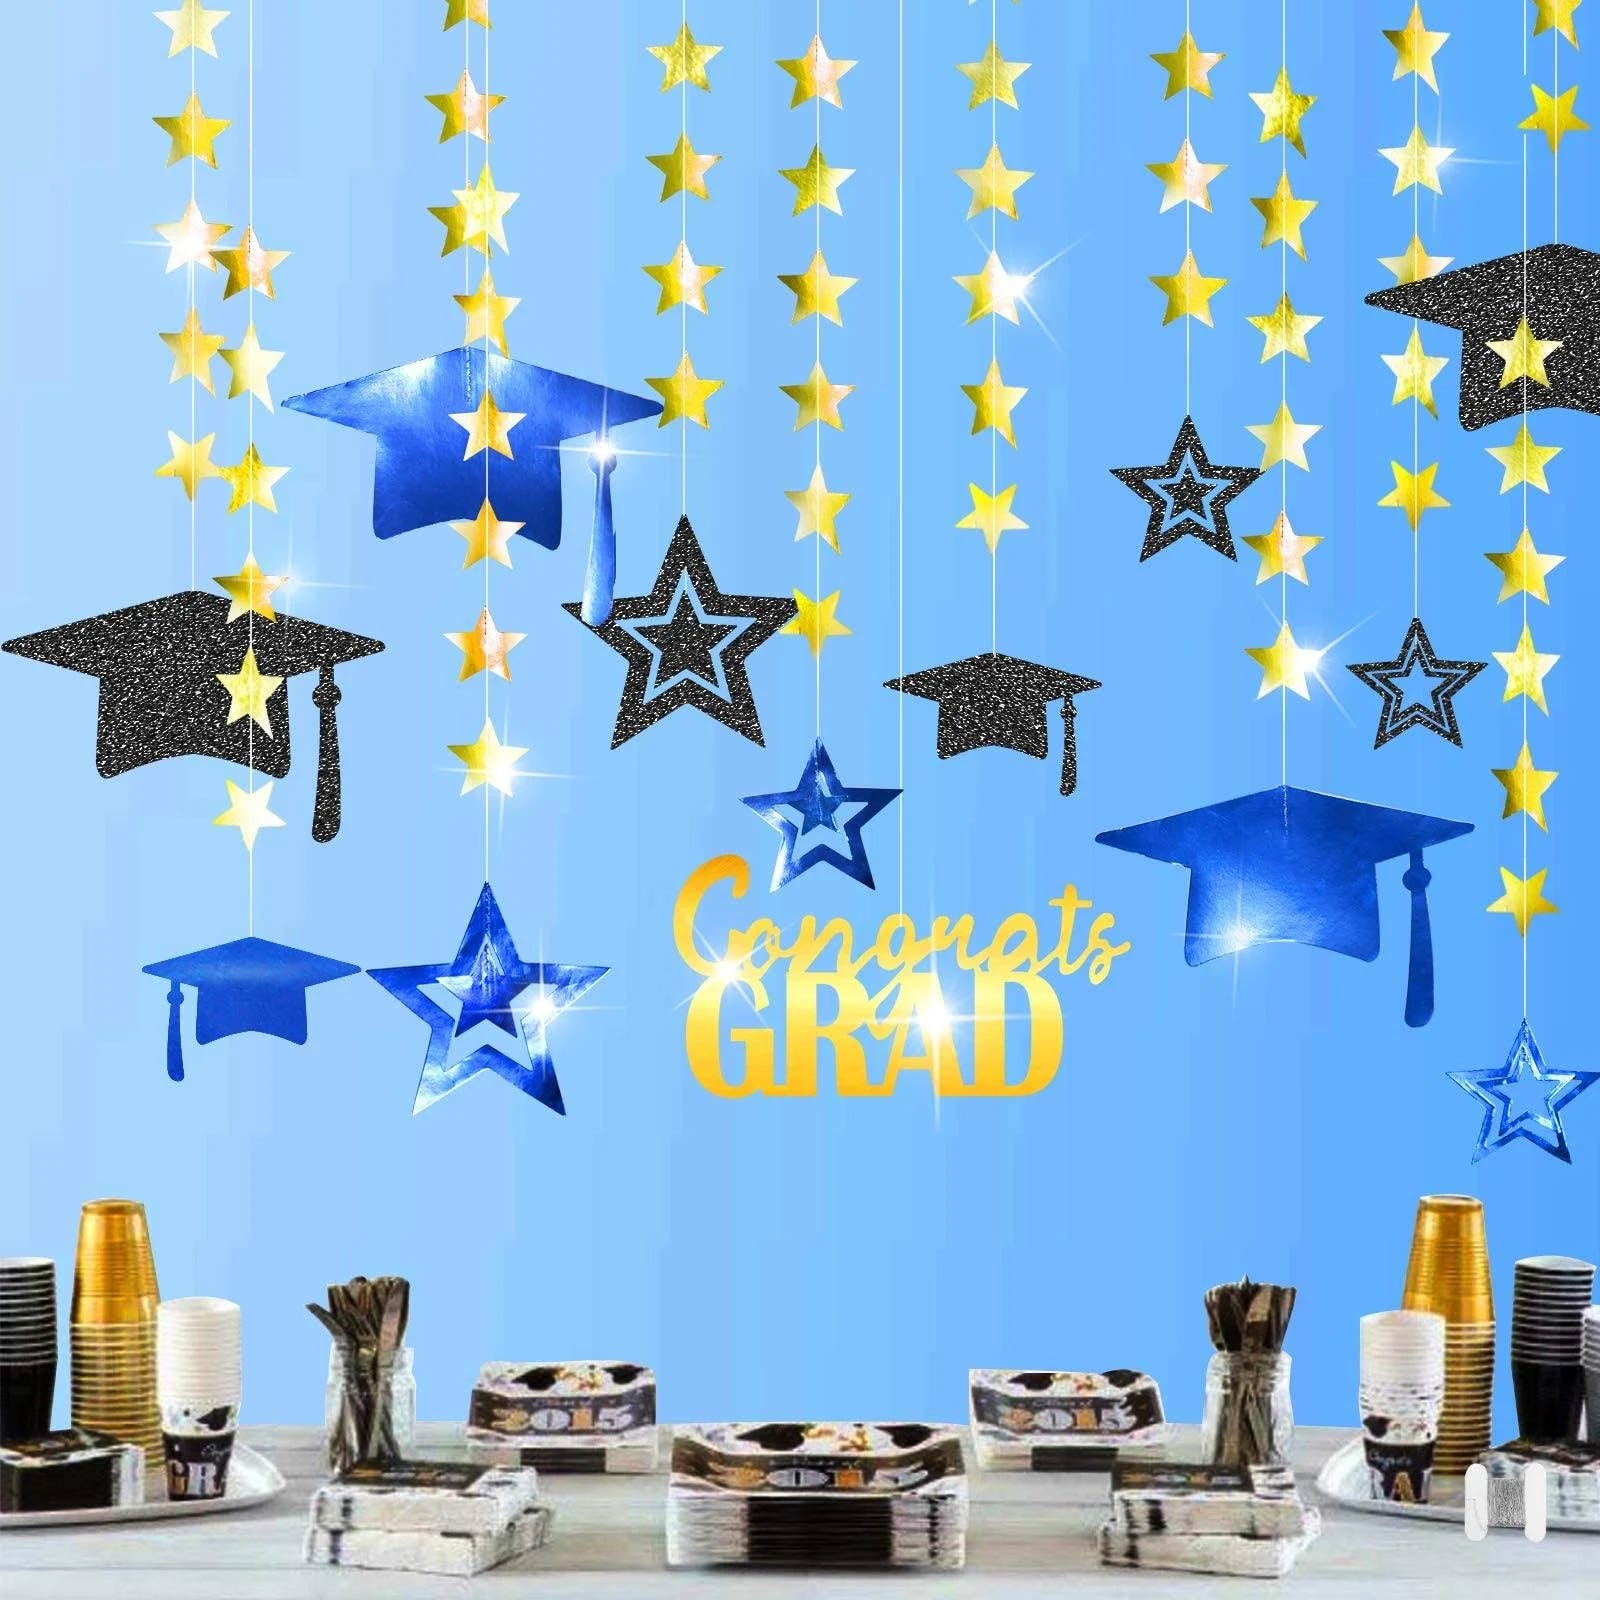 Royal Blue Graduation Party Decor Kit with Banner and Stars | Image